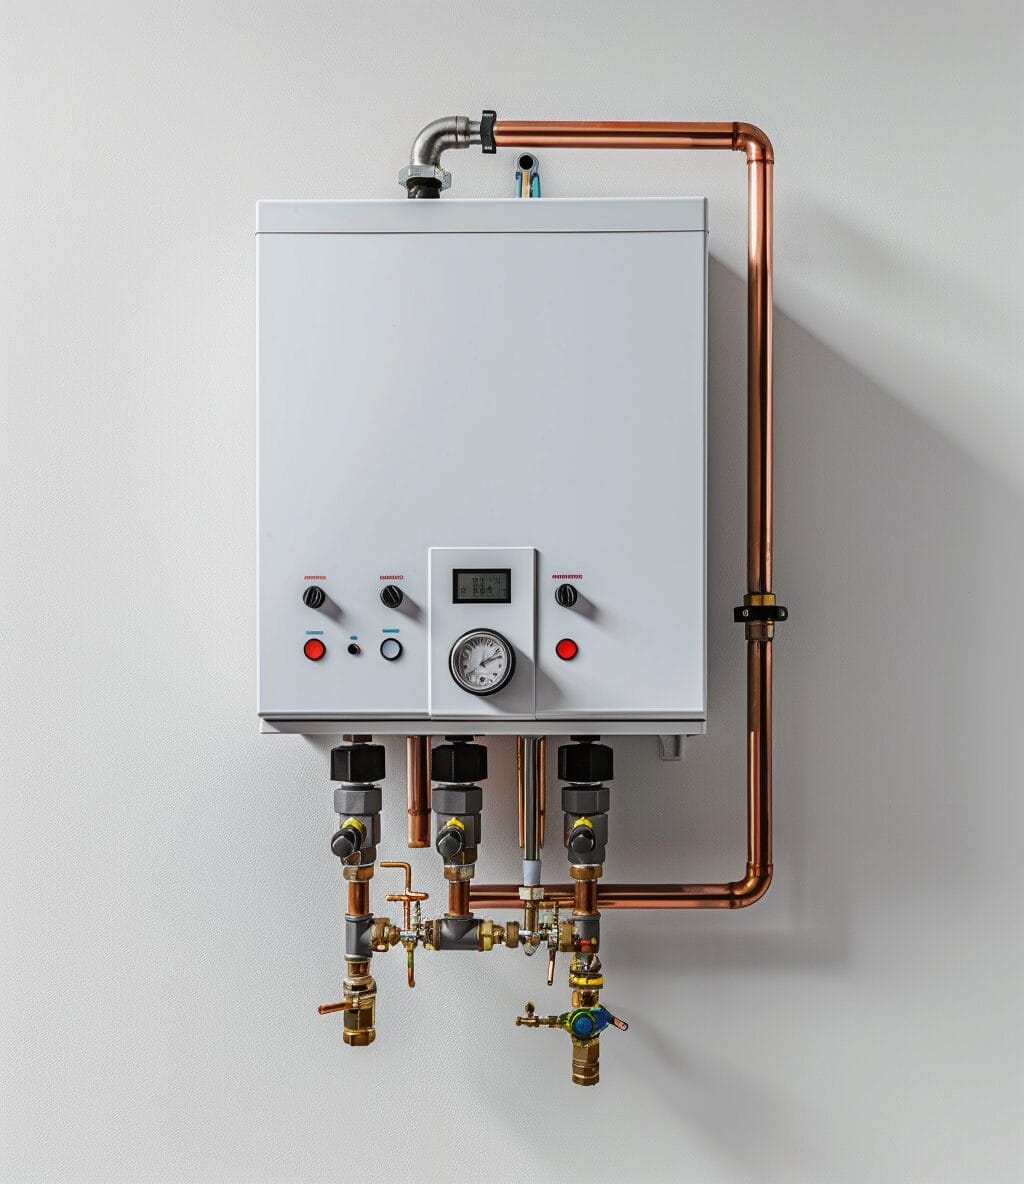 Electric boiler with Copper pipes